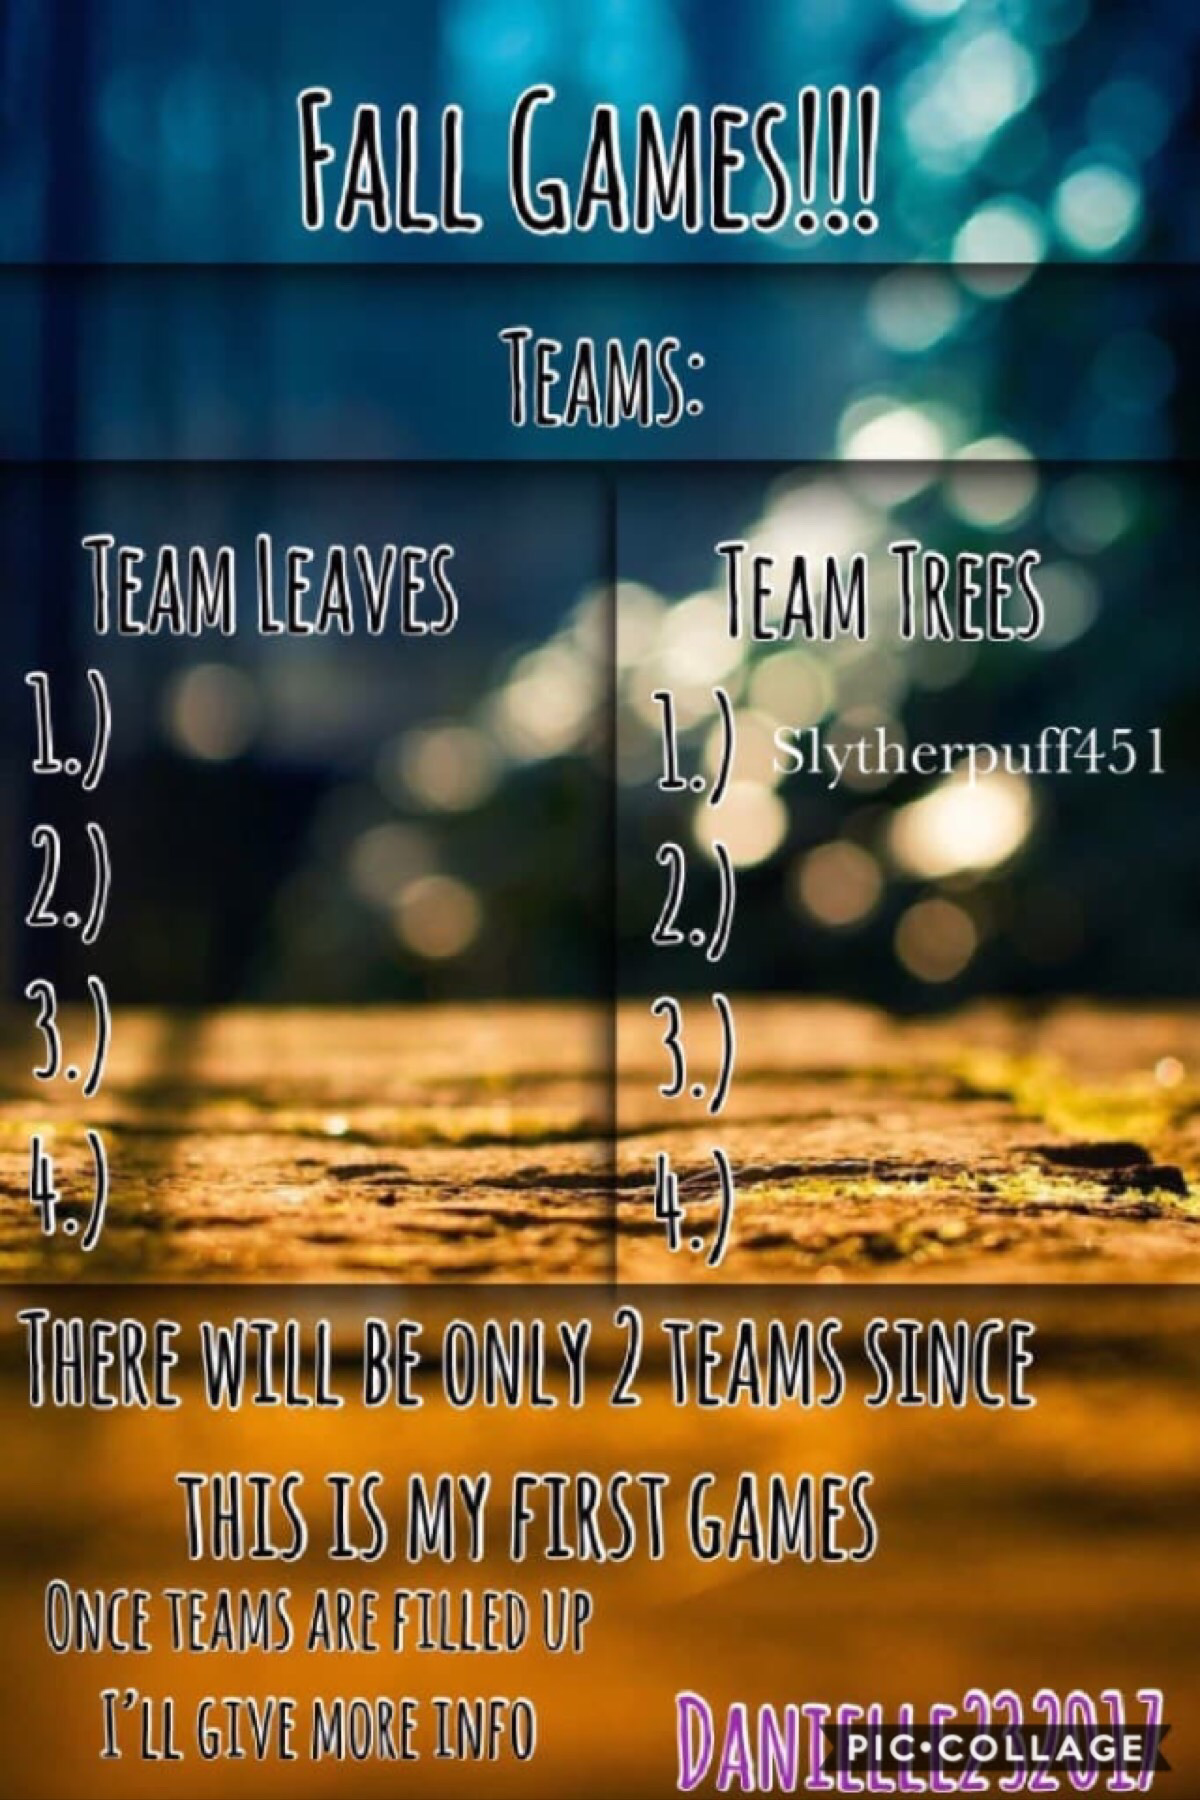 Tap for my info!!!
Please join if y’all want to!!!
4 places left for Team Leaves
And 
3 places left for Team Trees 